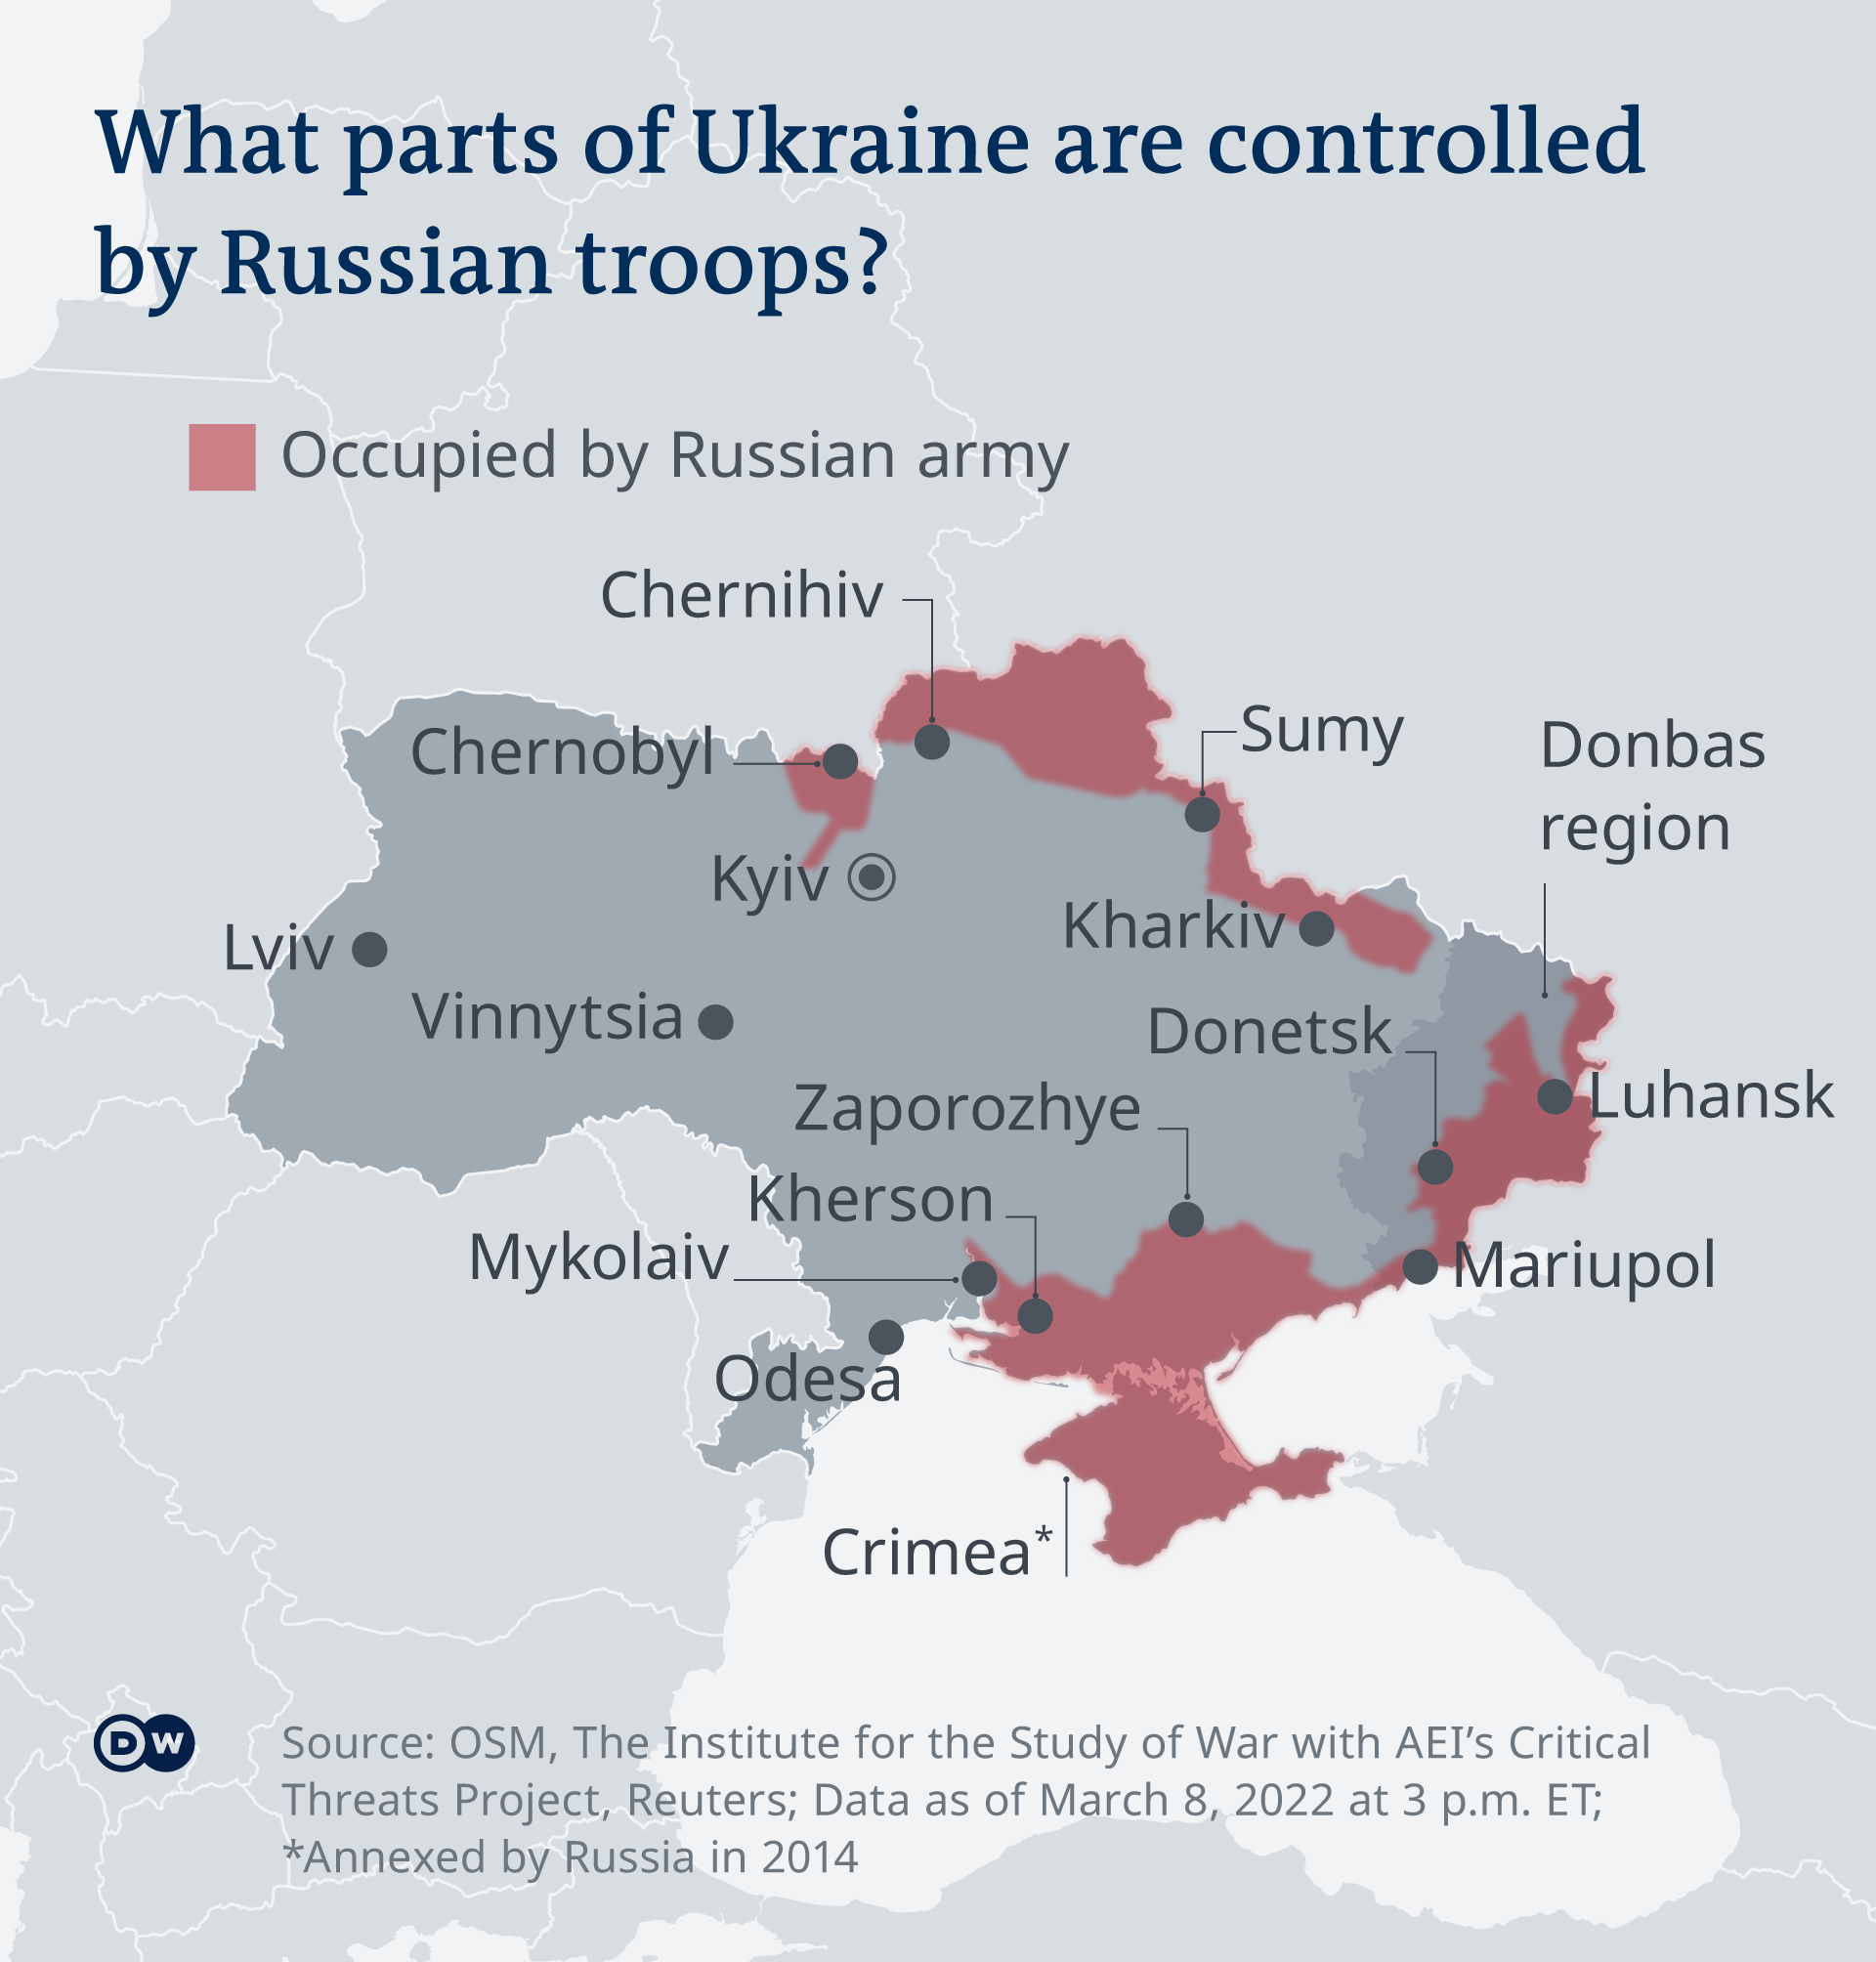 Map showing which parts of Ukraine are controlled by Russian troops